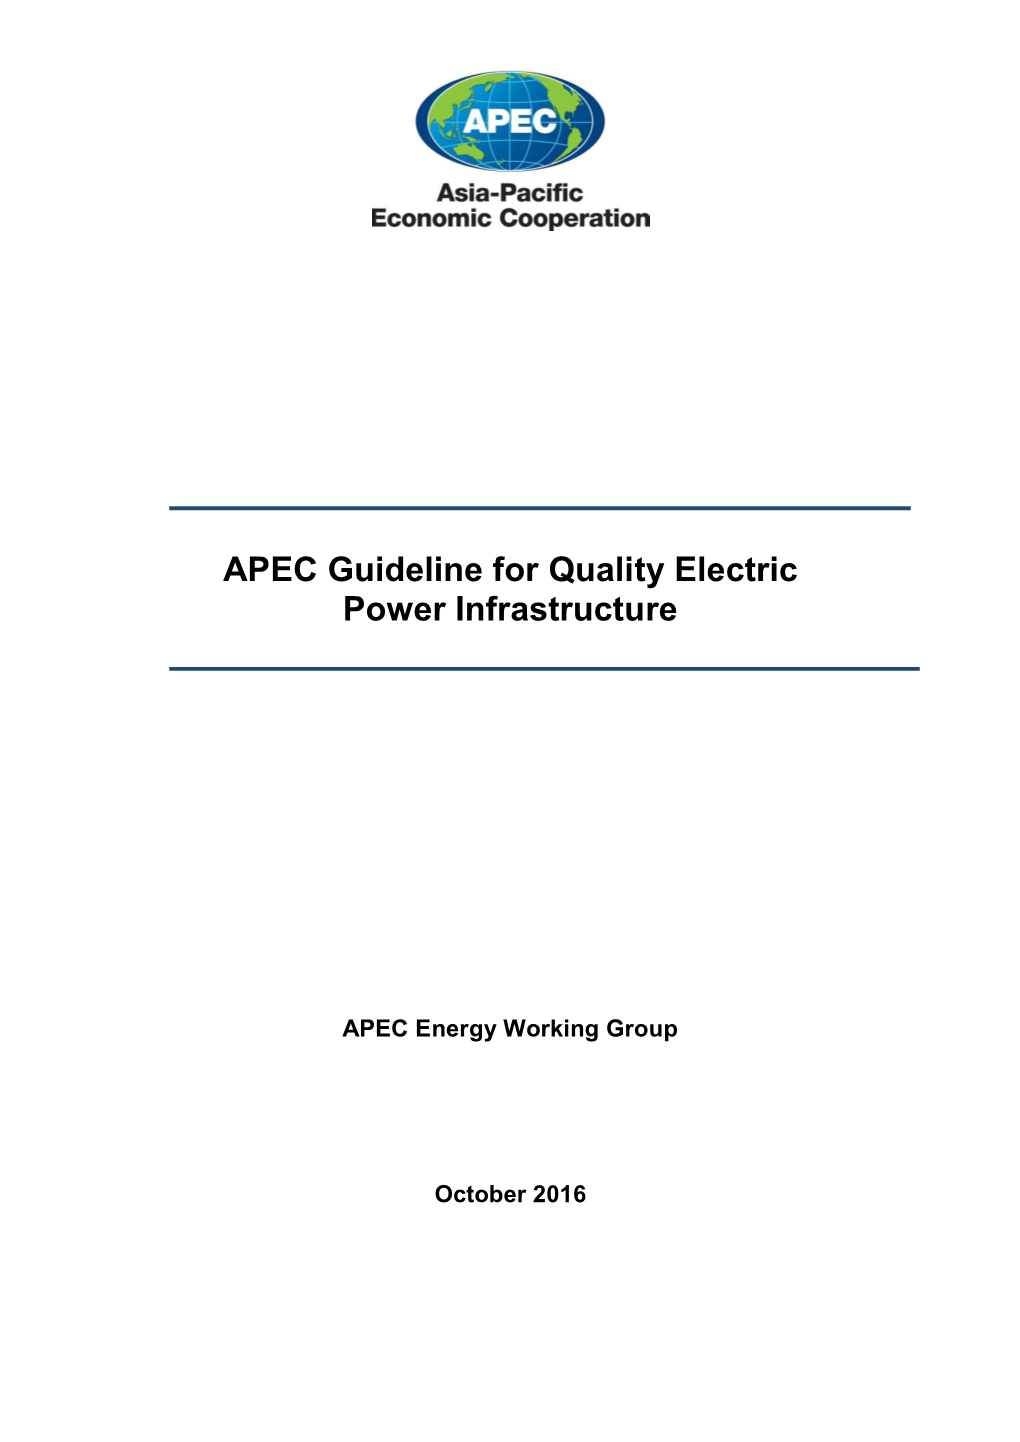 APEC Guideline for Quality Electric Power Infrastructure